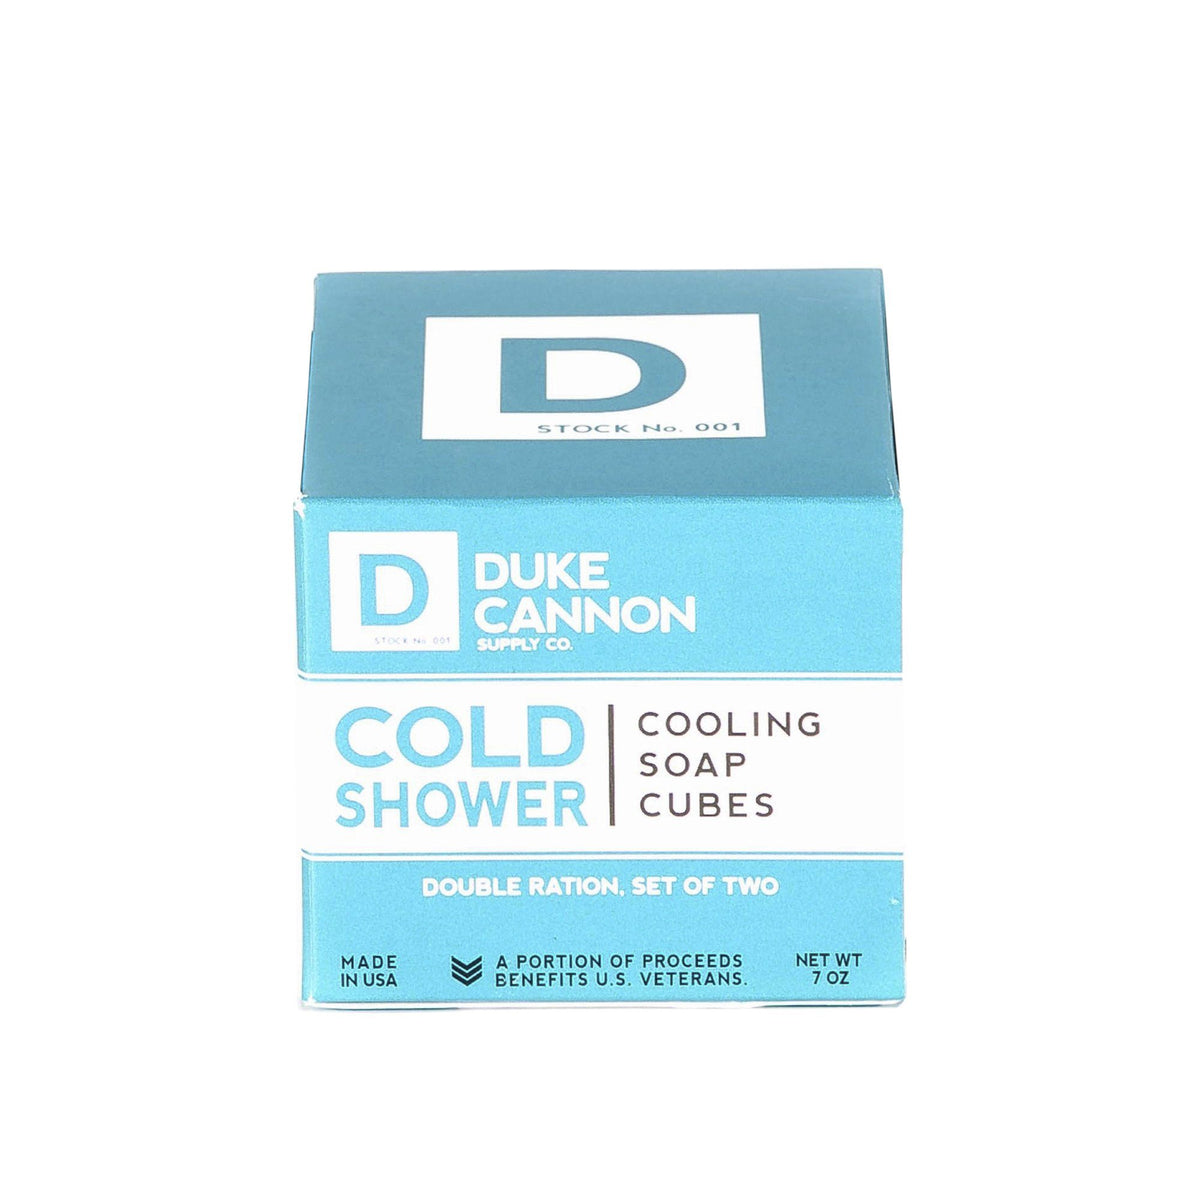 https://www.shopfendrihan.shop/wp-content/uploads/1691/38/be-inspired-and-look-through-our-duke-cannon-supply-co-cold-shower-cooling-soap-cubes-discontinued-collection-buy-now_4.jpg